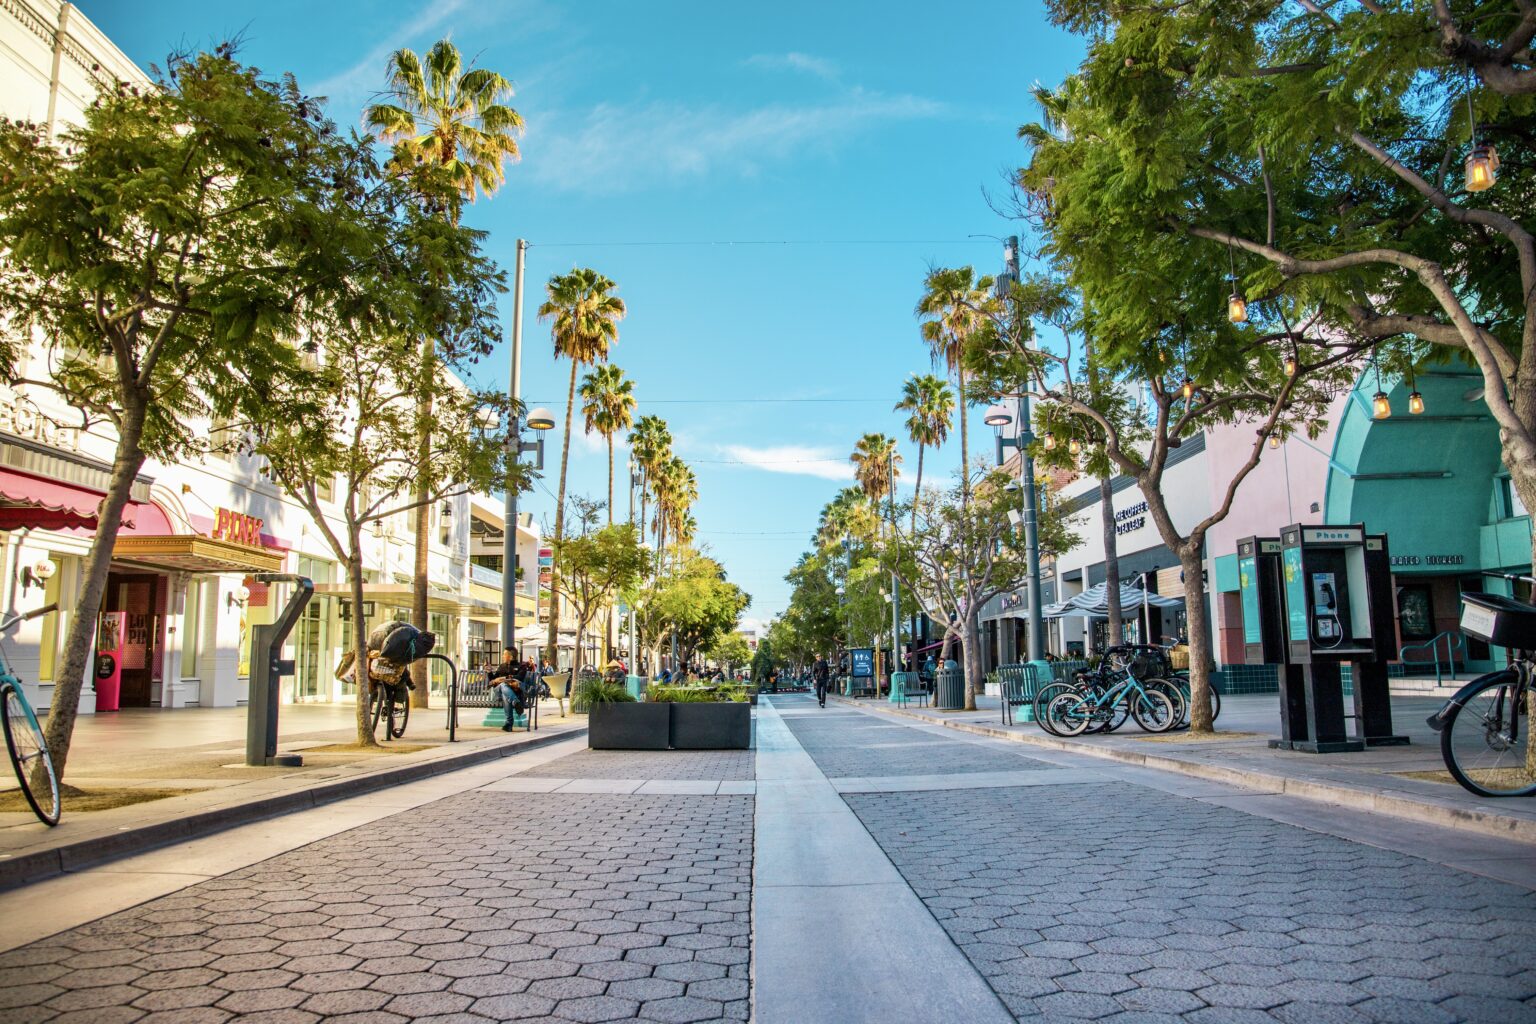 One Day In Santa Monica Itinerary & Guide - The Geographical Cure